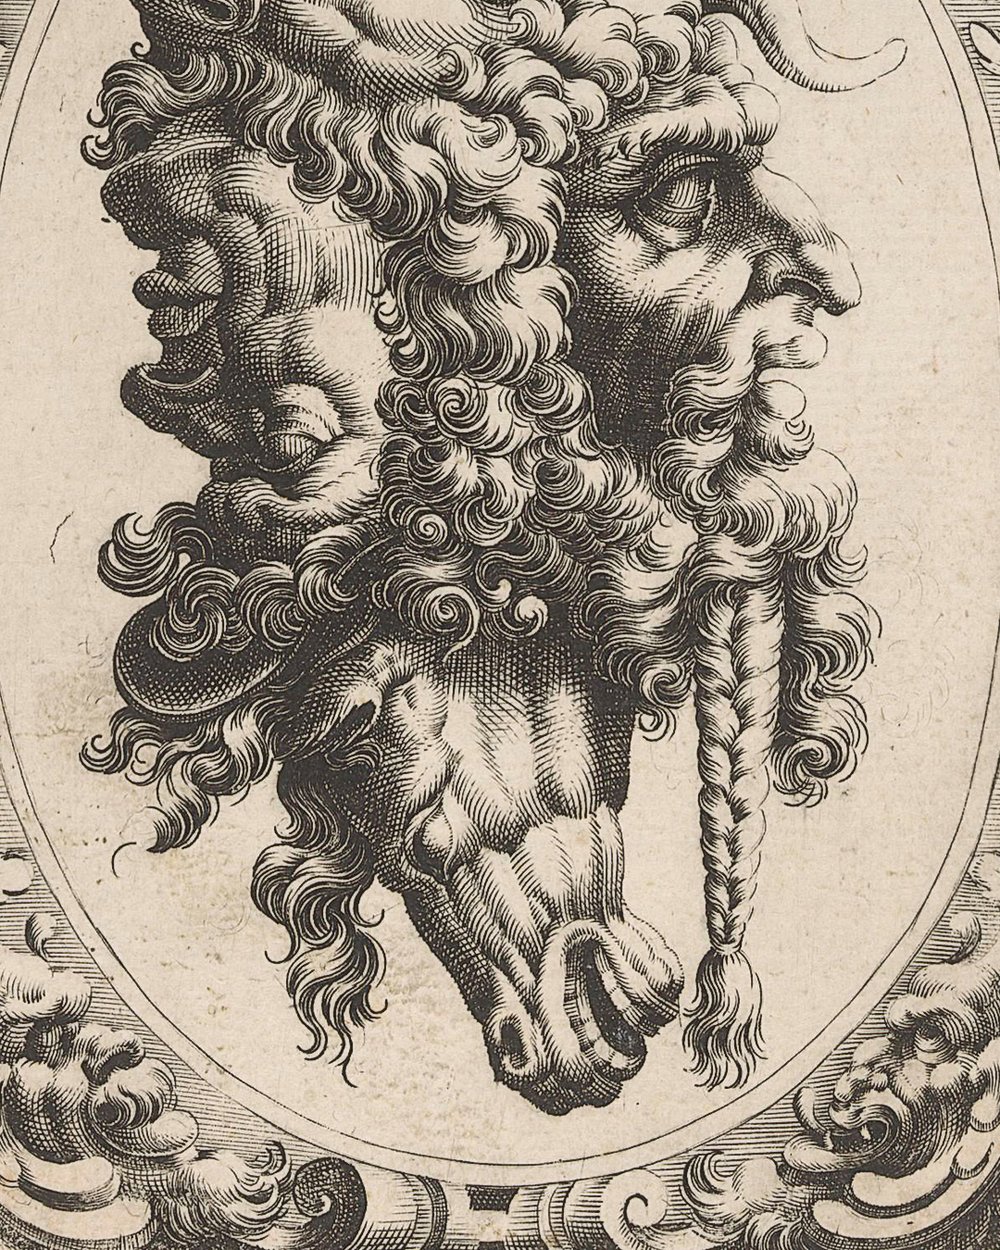 ''Two faces, a horse's head and a goat's head'' (1590 - 1660